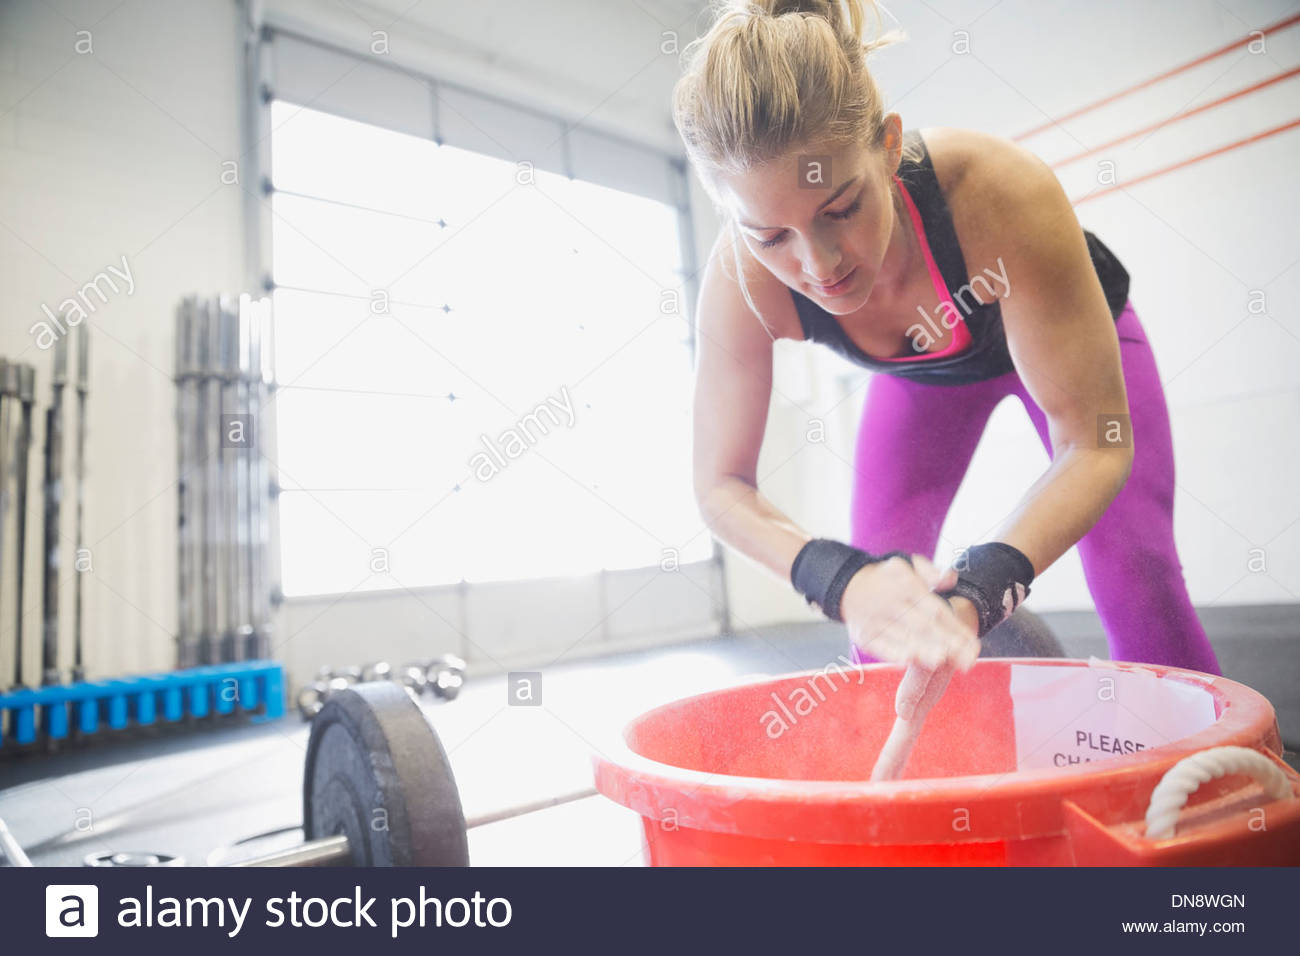 Woman chalking hands before training Stock Photo